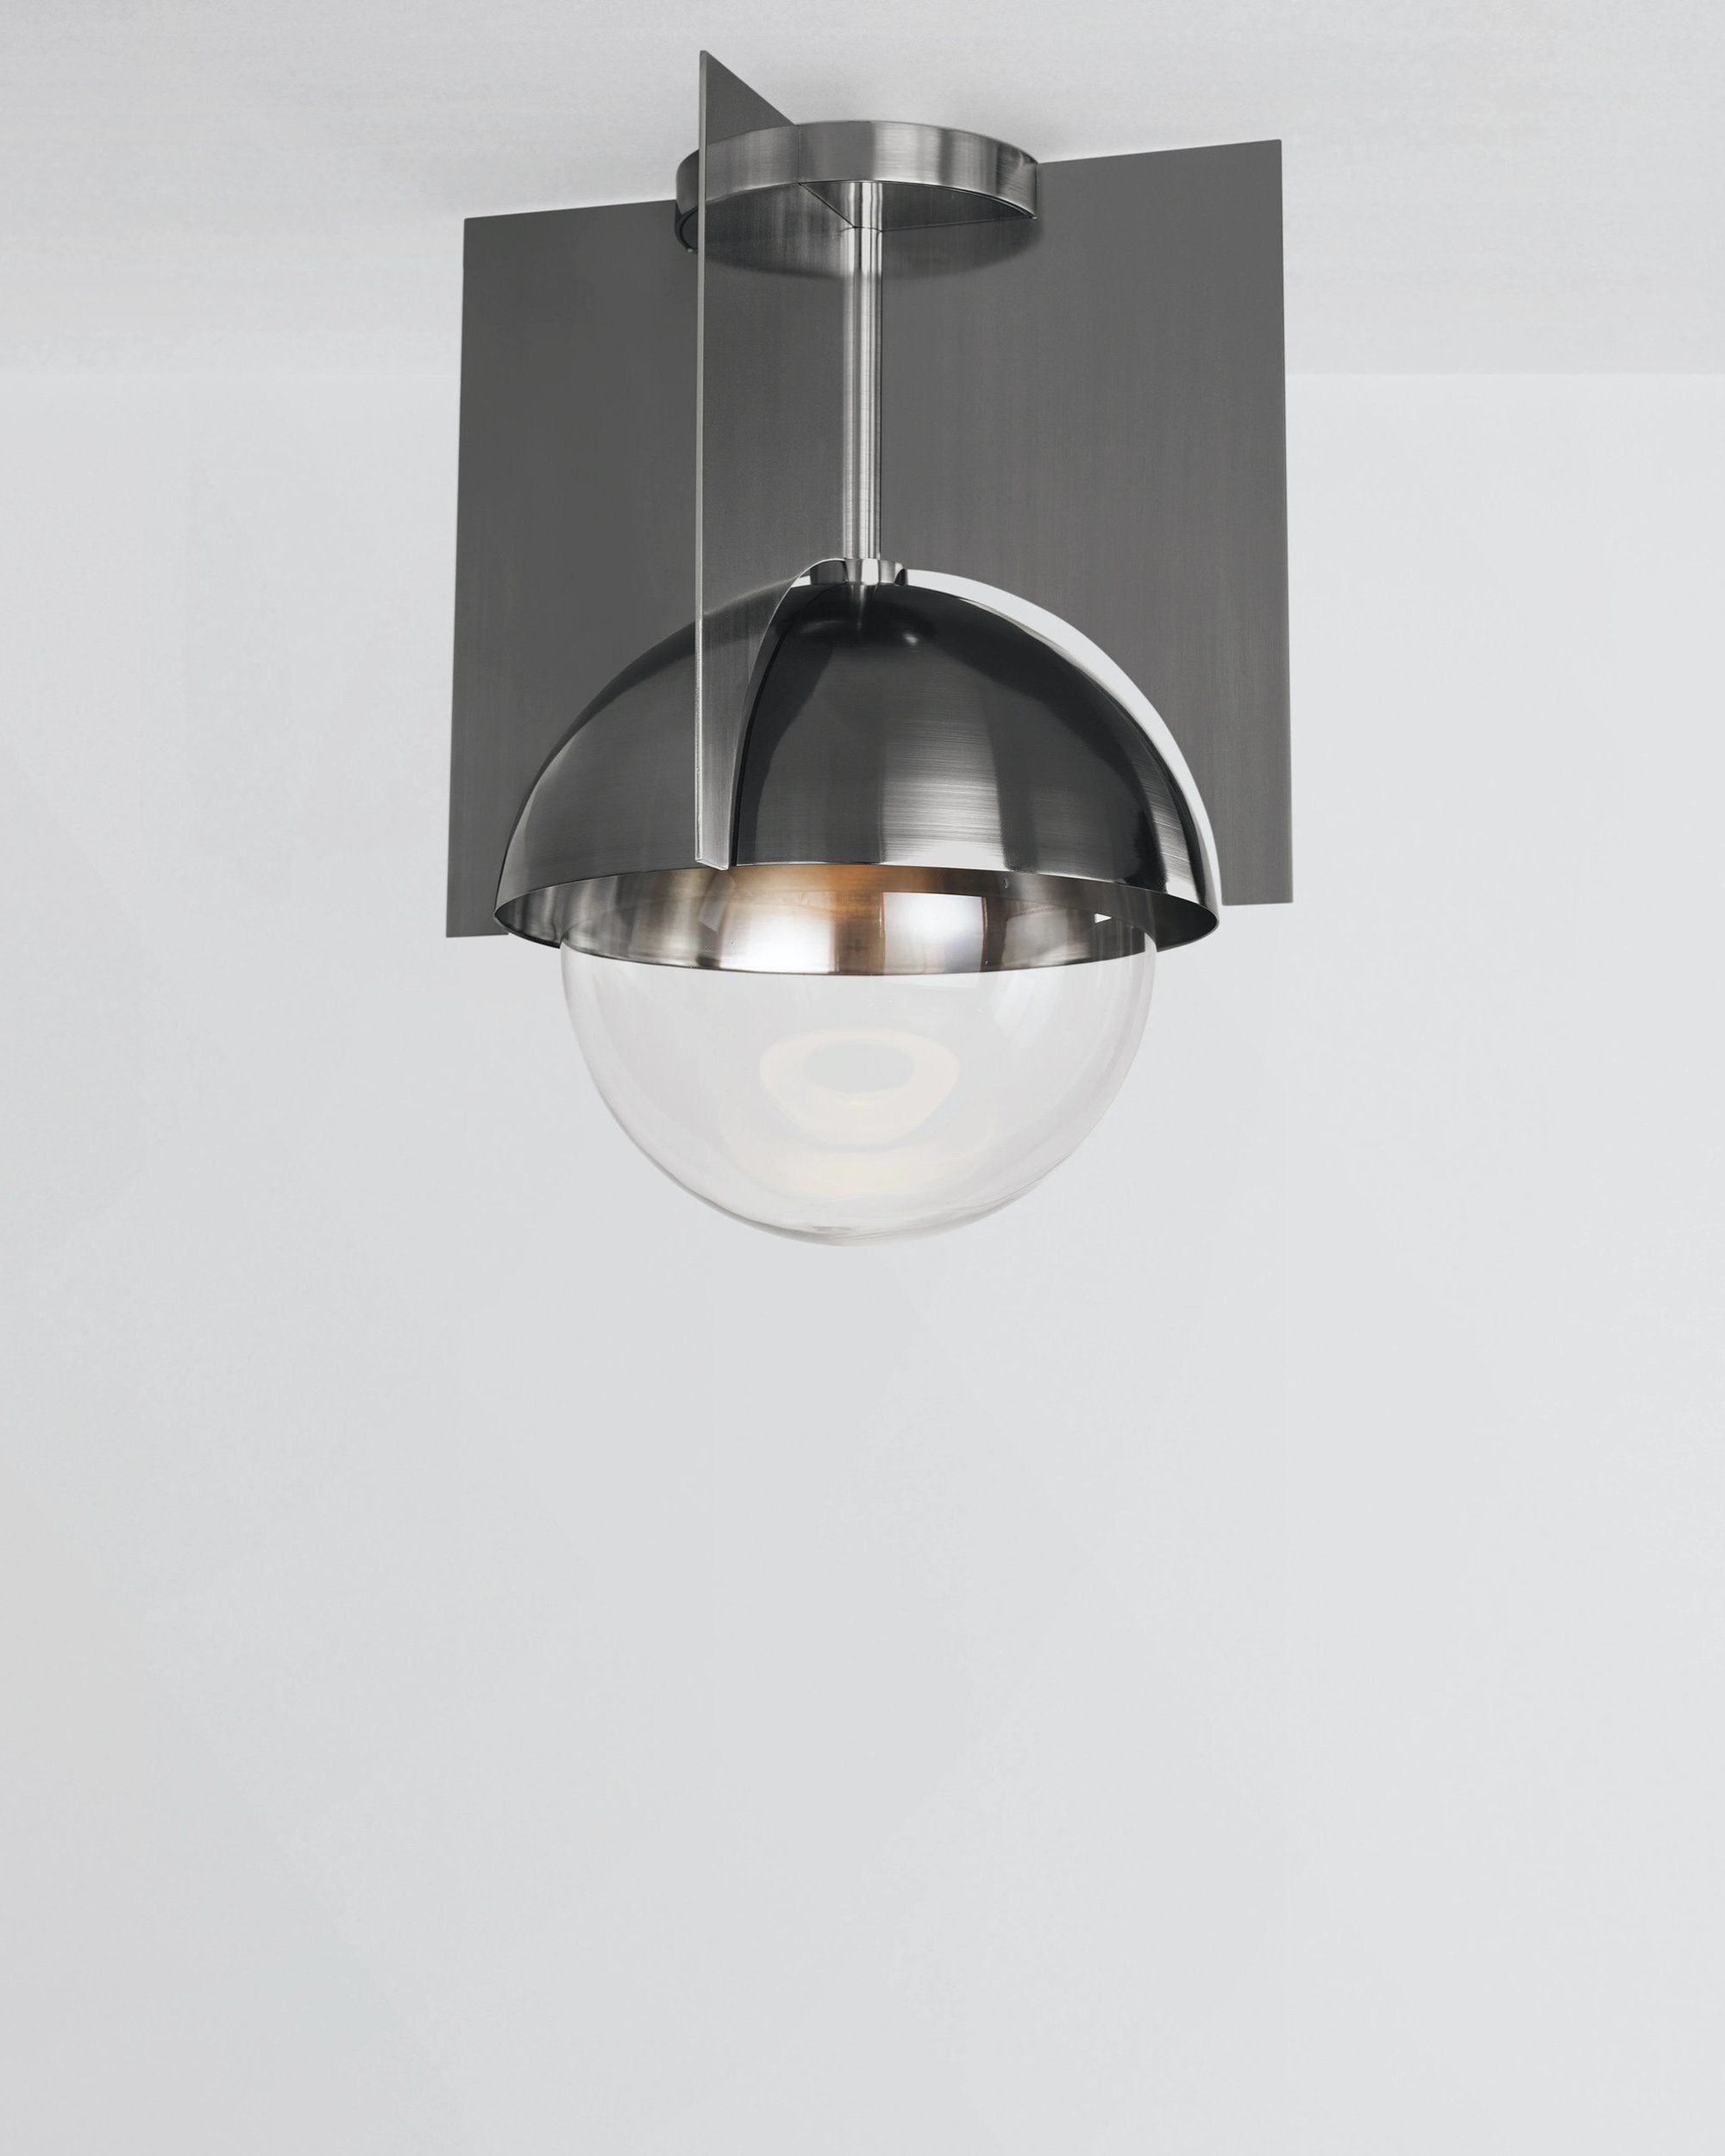 NORTH 12 CEILING LIGHT IN PEWTER